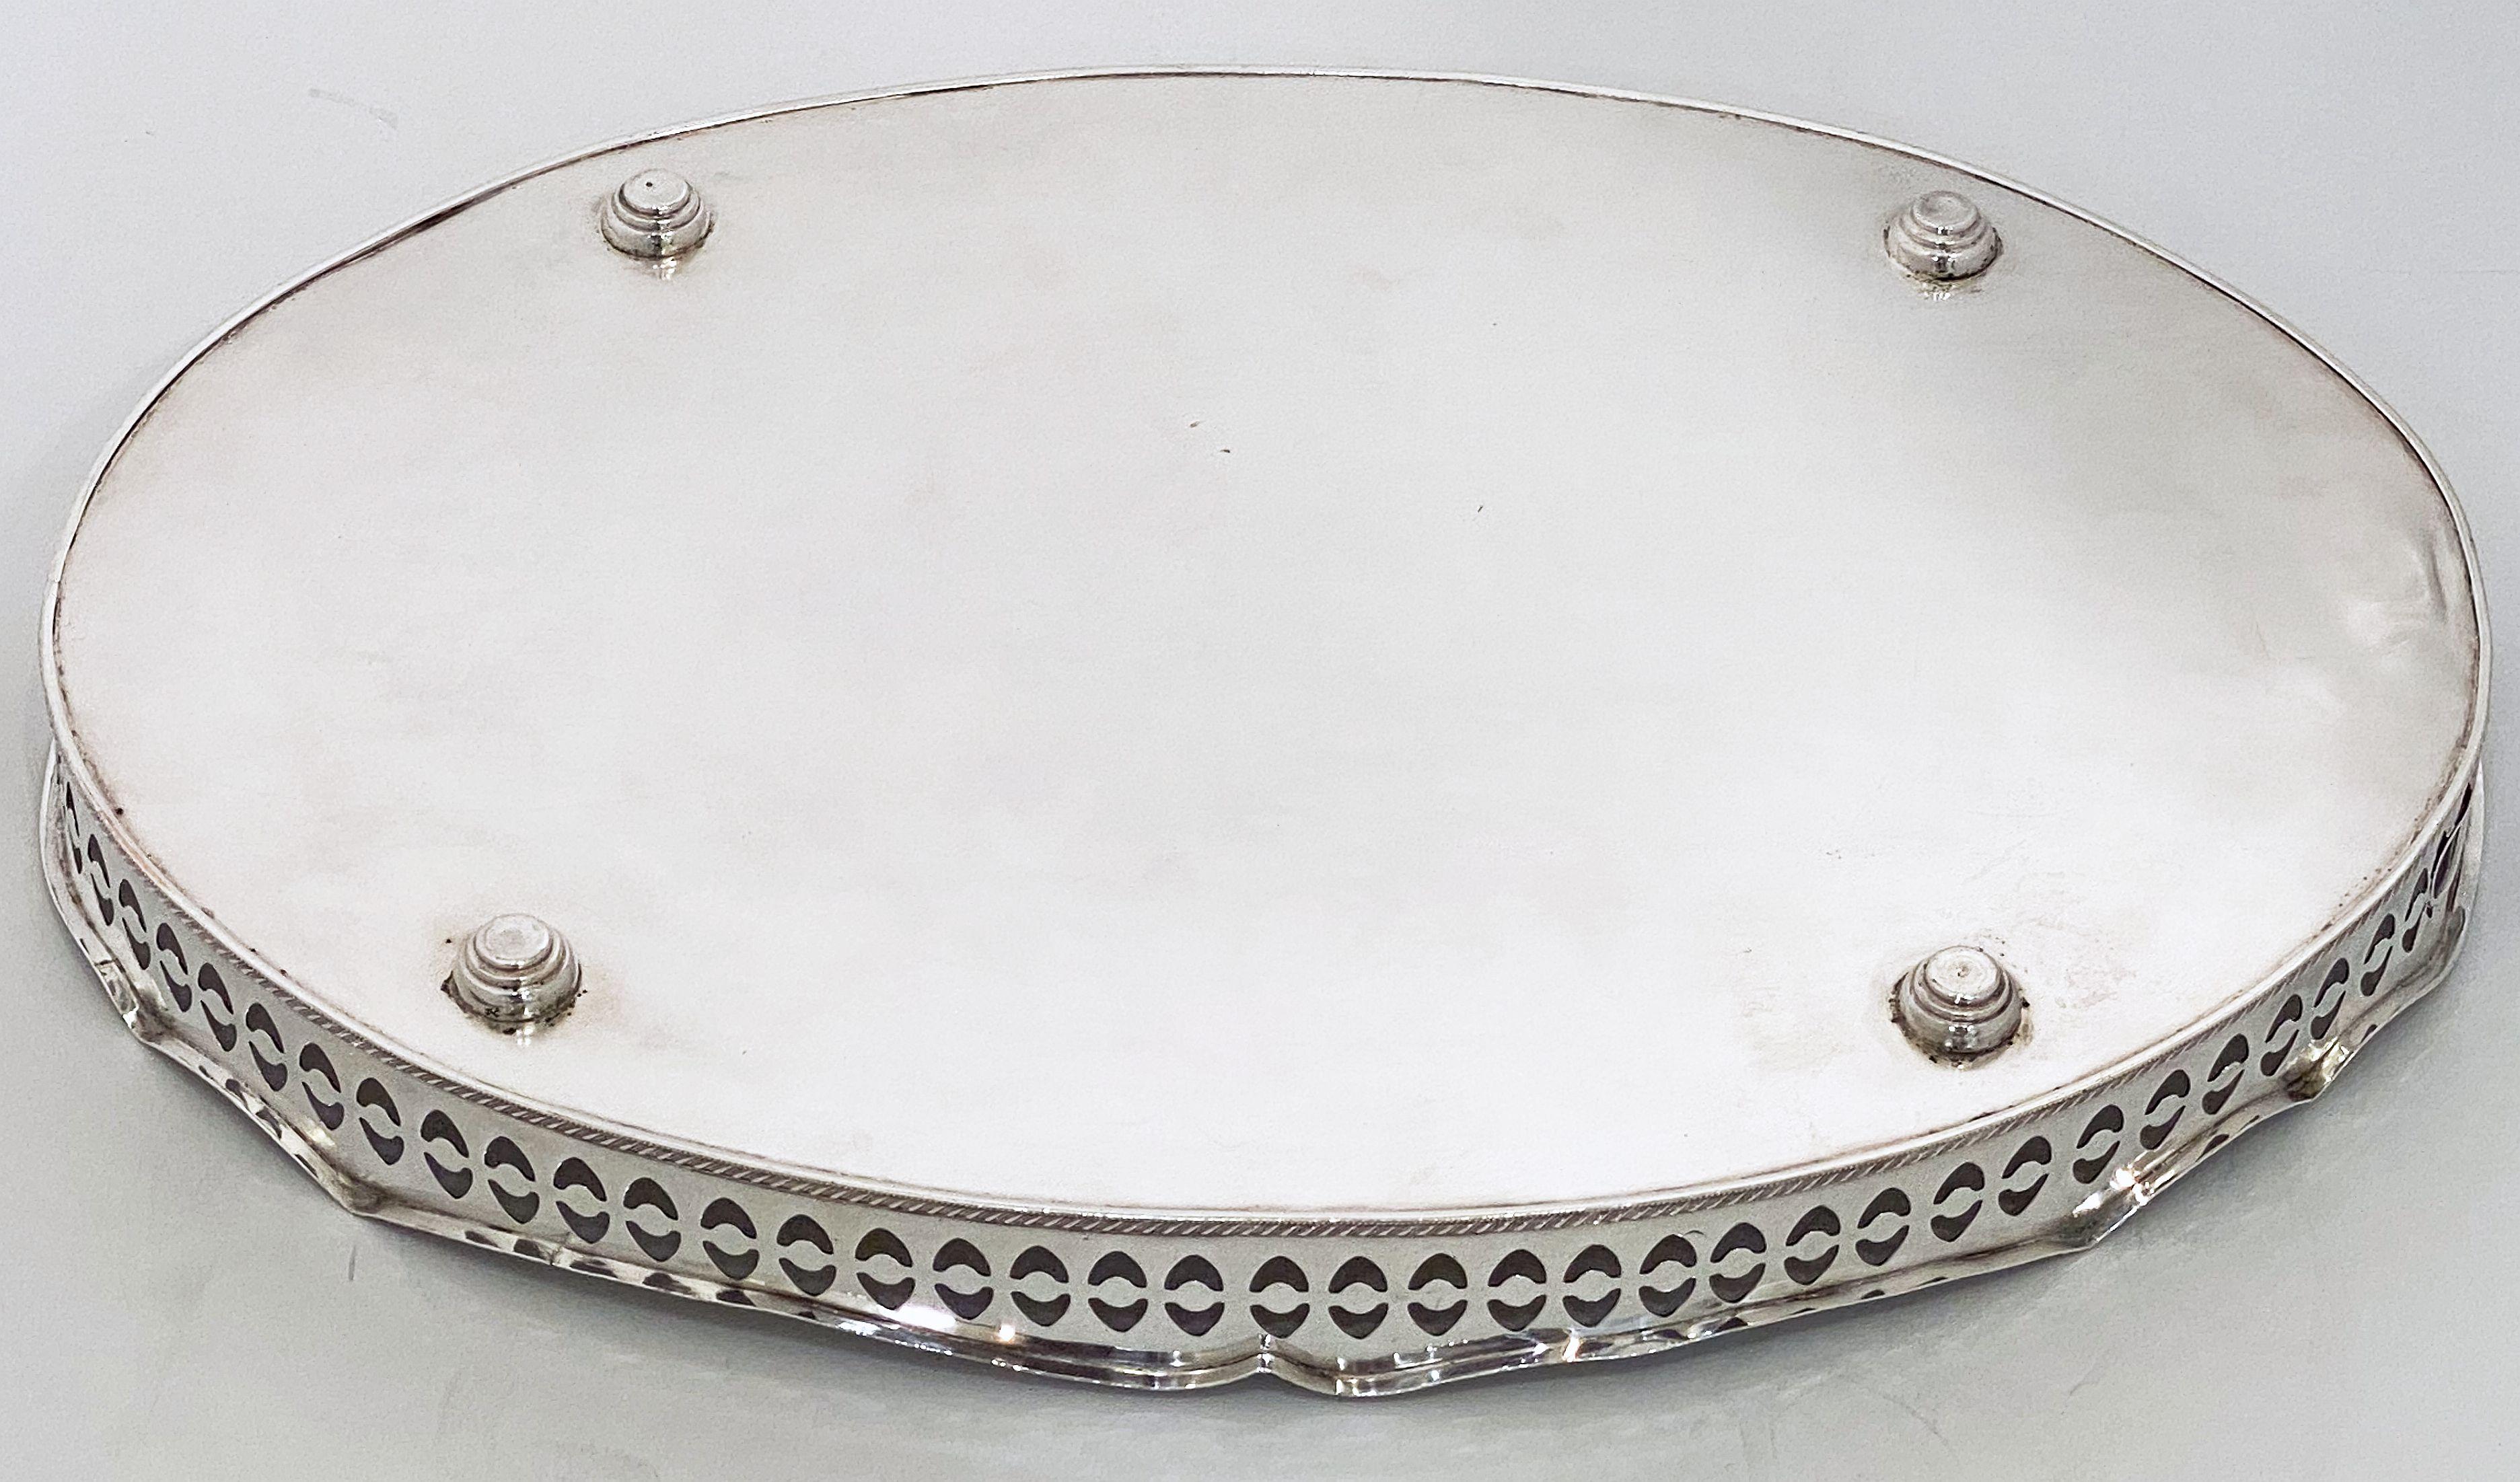 English Silver Oval Gallery Serving or Drinks Tray 8